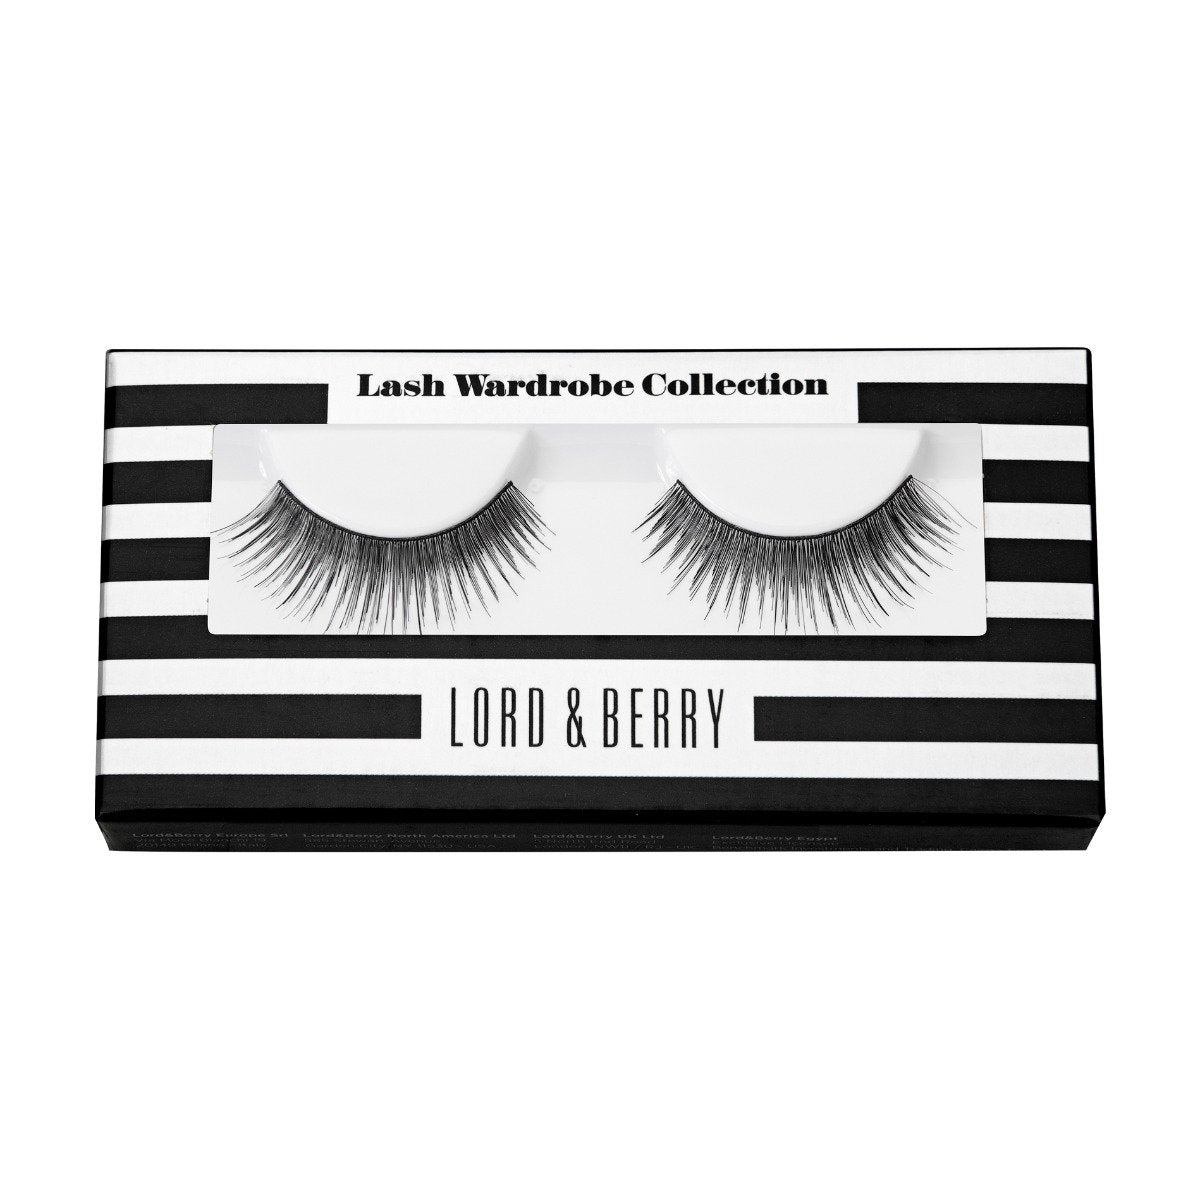 Lord & Berry Eyelashes Wardrobe Collection - EL24 - Bloom Pharmacy